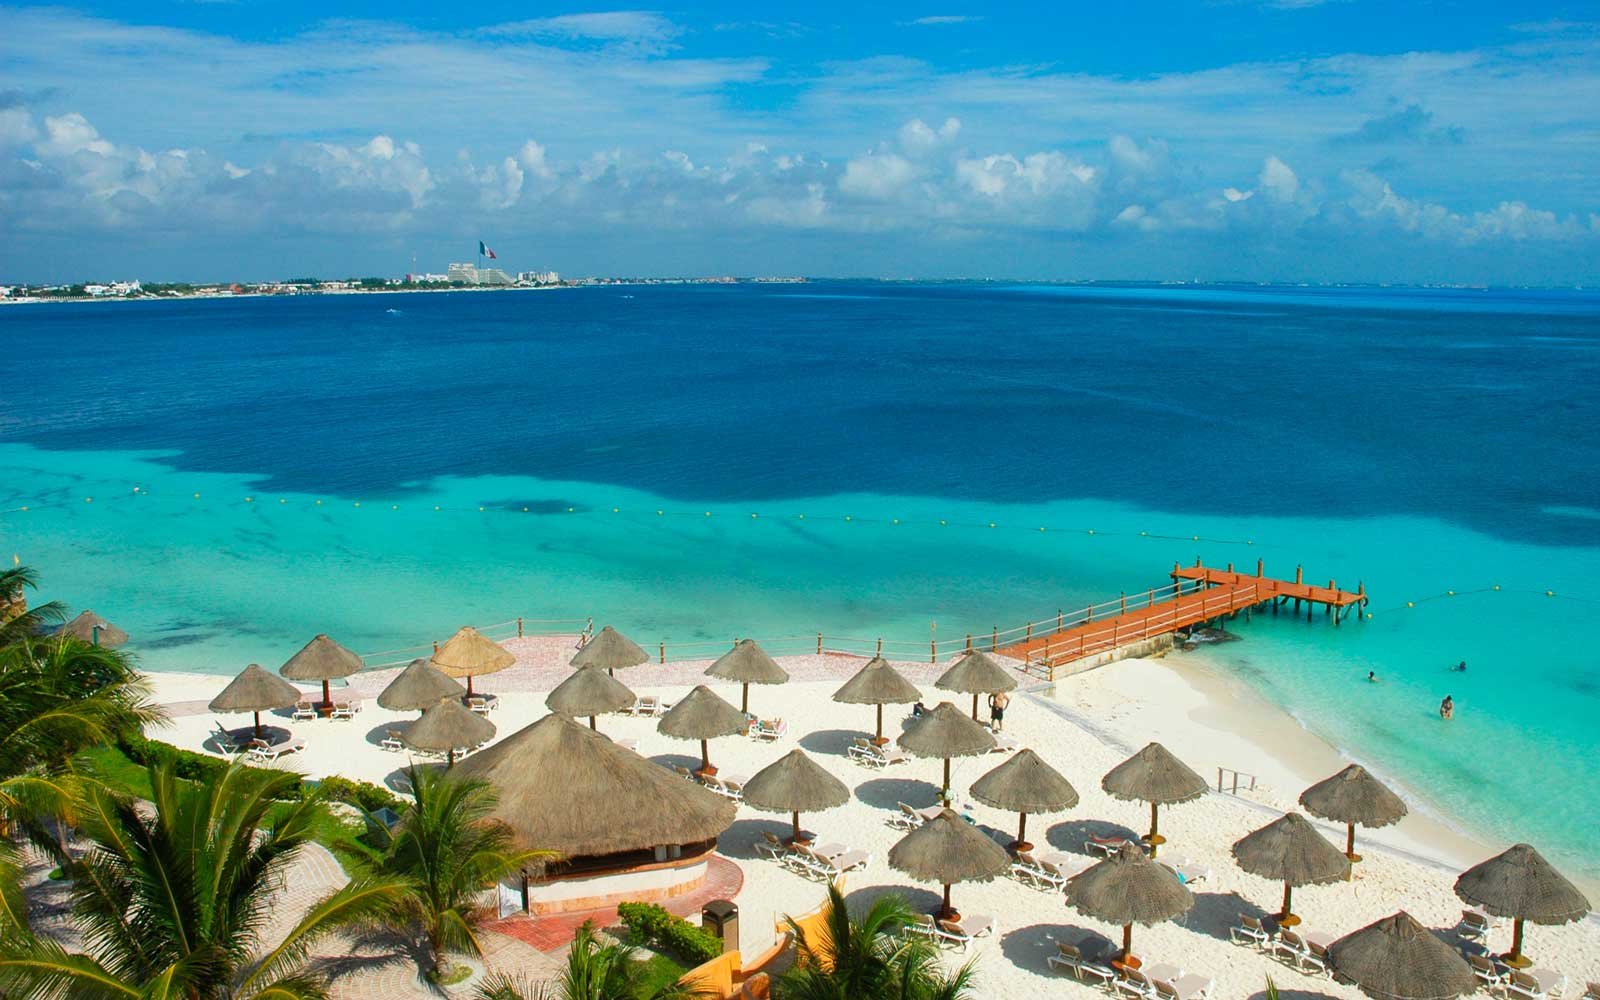 New Orleans to Cancun Mexico $255 RT Airfares on American Airlines BE (Travel November - March 2023)